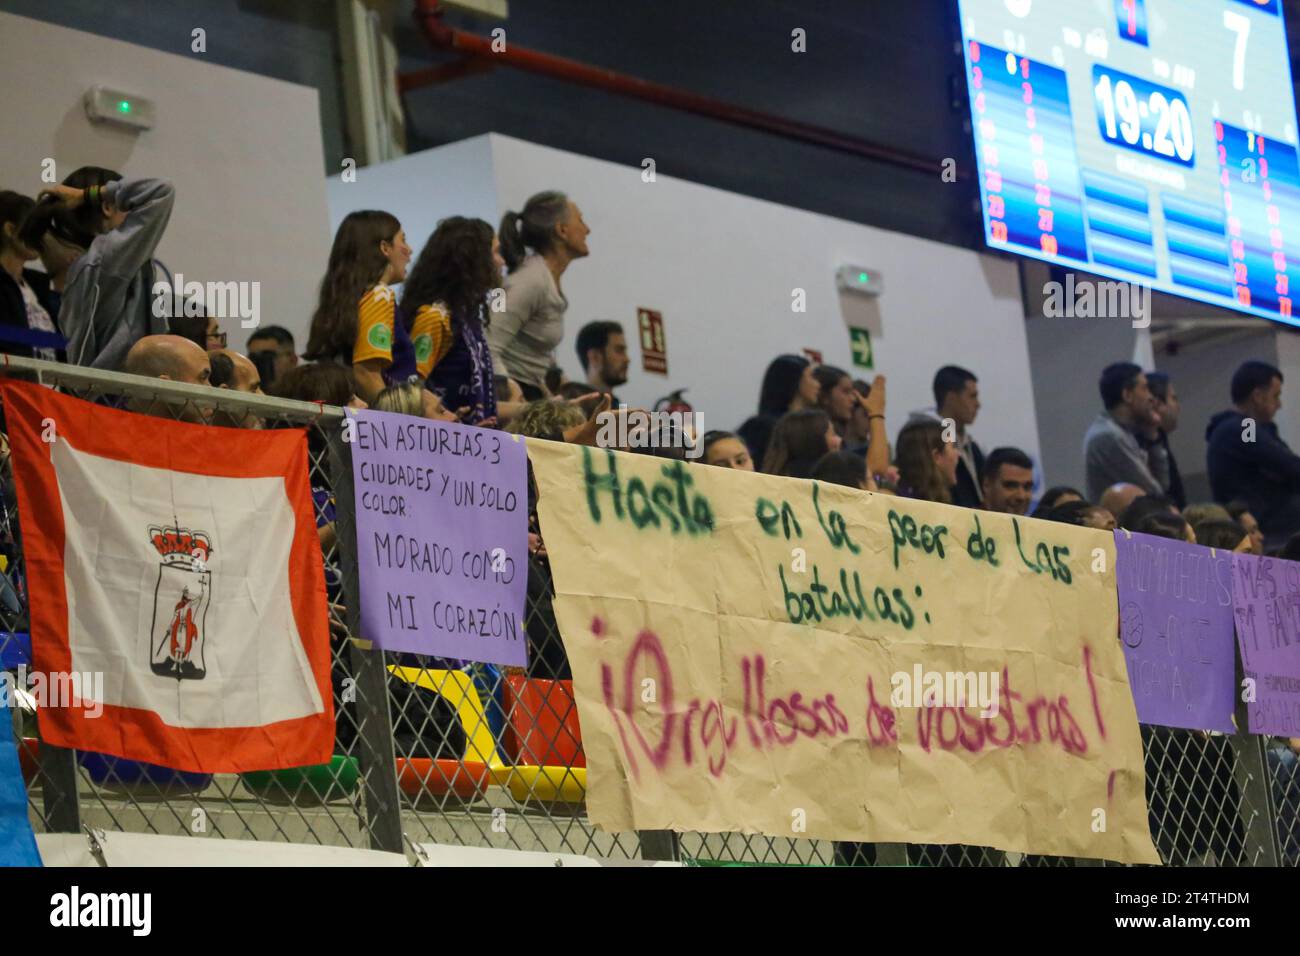 Oviedo, Spain, November 1, 2023: Numerous Motive.co Gijon Balonmano La Calzada fans gathered at the match during the 9th Matchday of the Iberdrola Guerreras League between Lobas Global Atac Oviedo and Motive.co Gijon Balonmano La Calzada, on November 1, 2023, at the Florida Arena Municipal Sports Center, in Oviedo, Spain. Credit: Alberto Brevers / Alamy Live News. Stock Photo